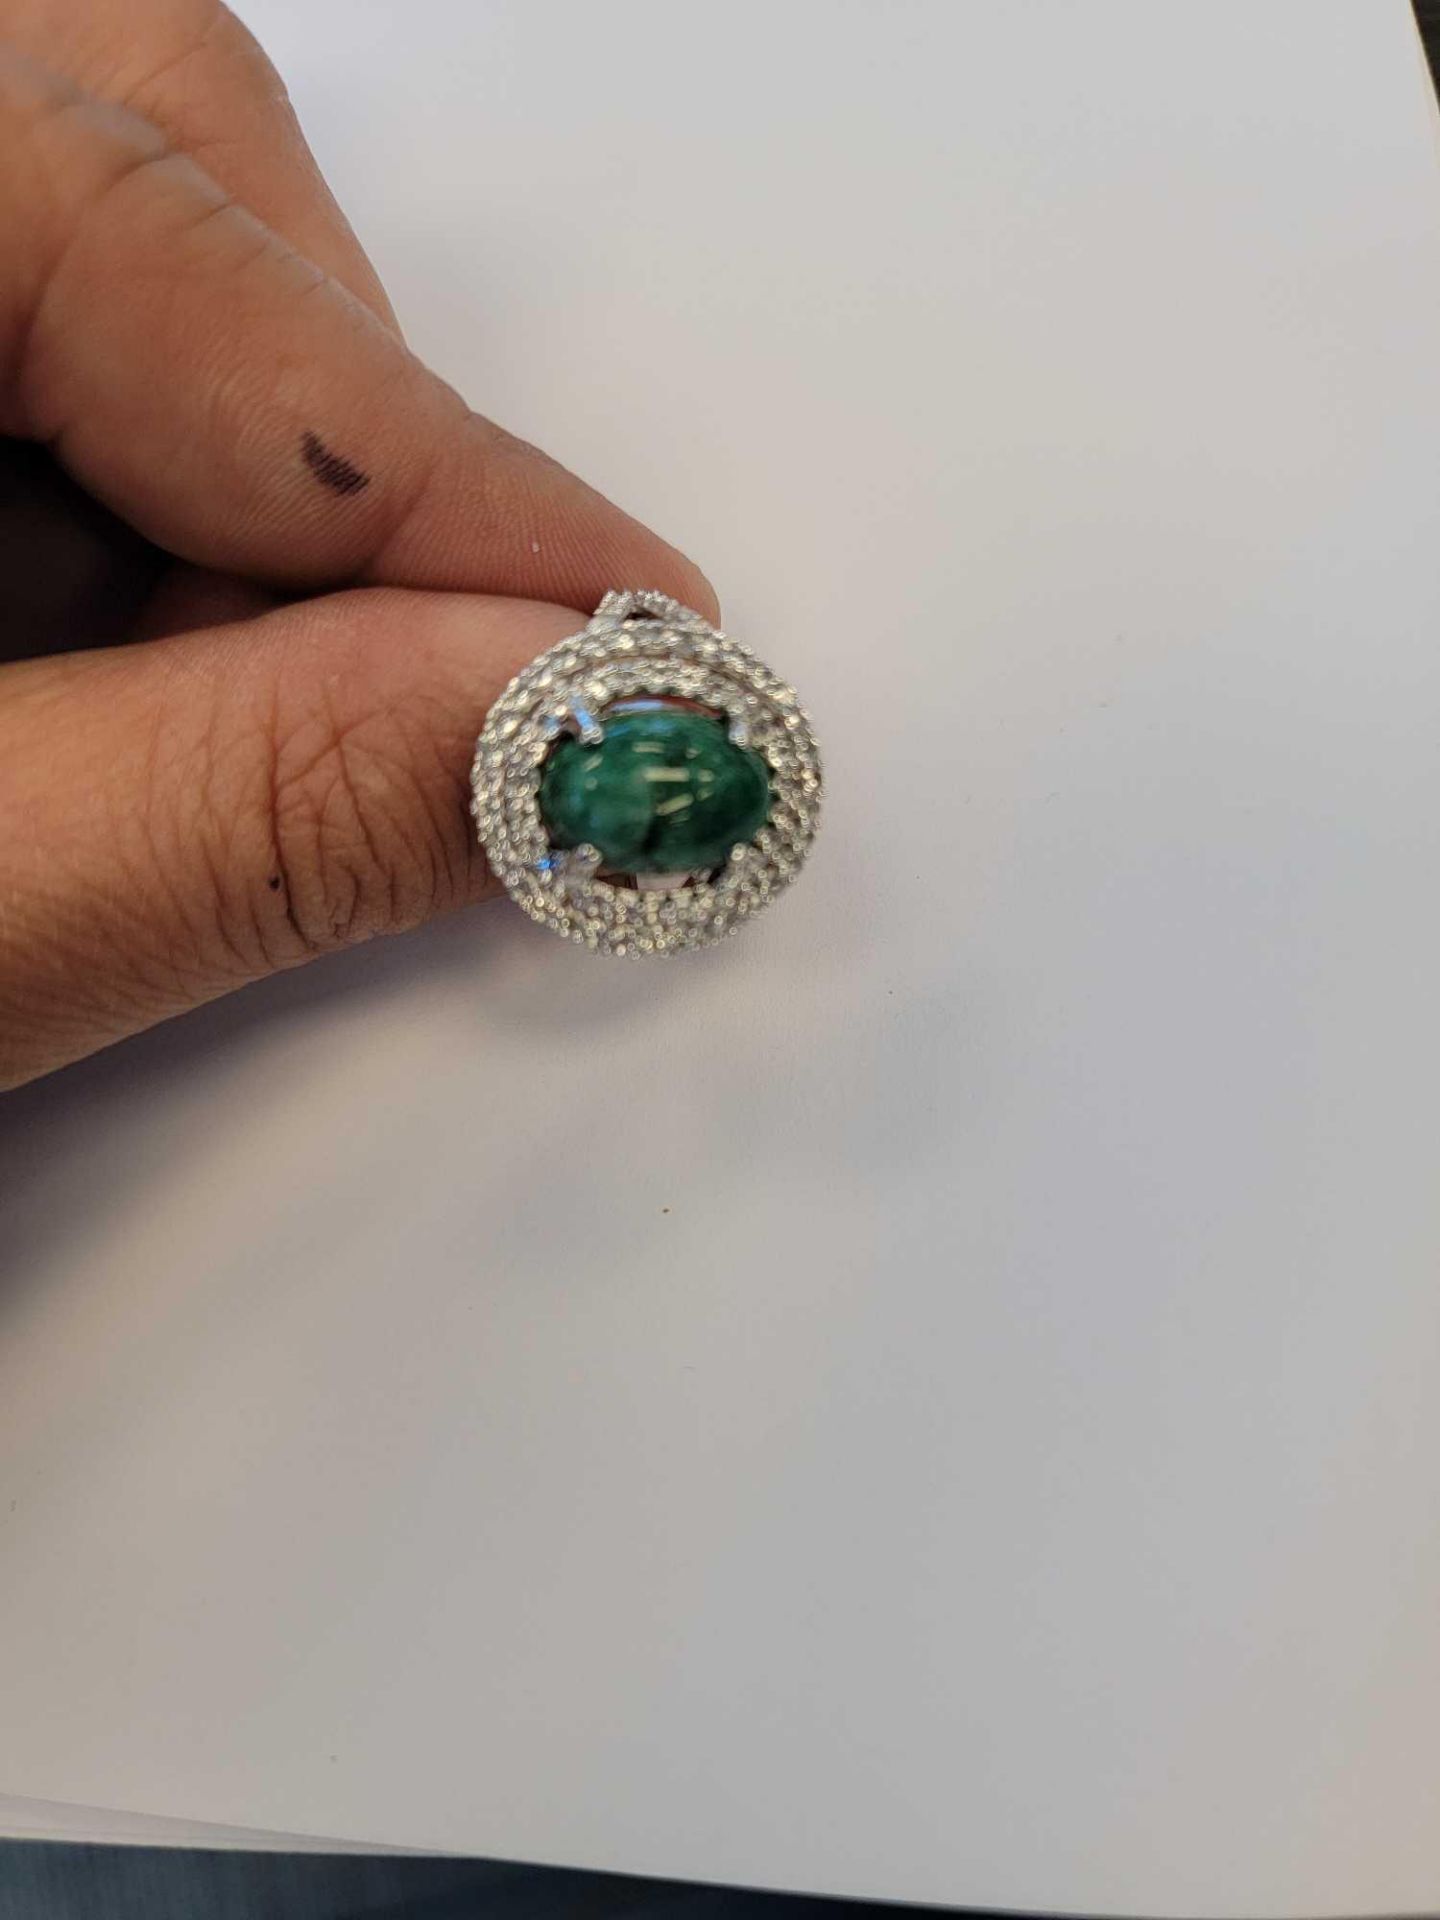 Dyed Green Beryl (emerald) 6.5 cts with white sapphire and sterling